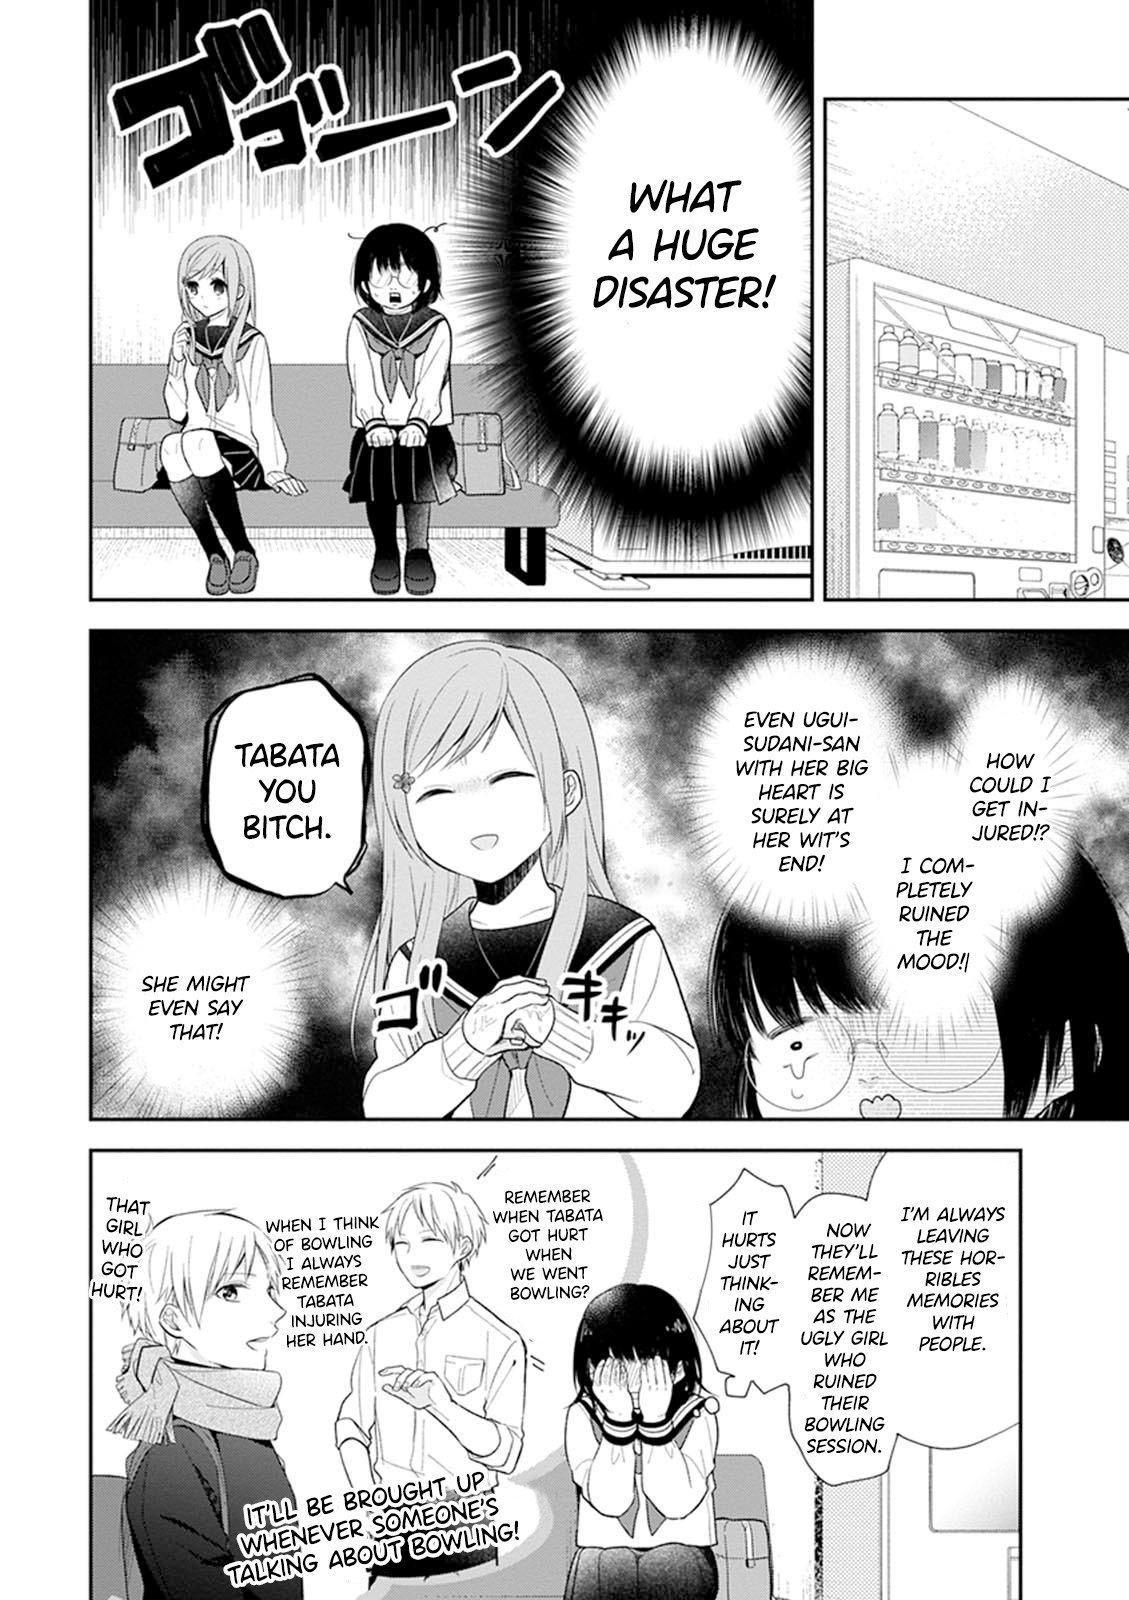 A Bouquet For An Ugly Girl vol.1 ch.3